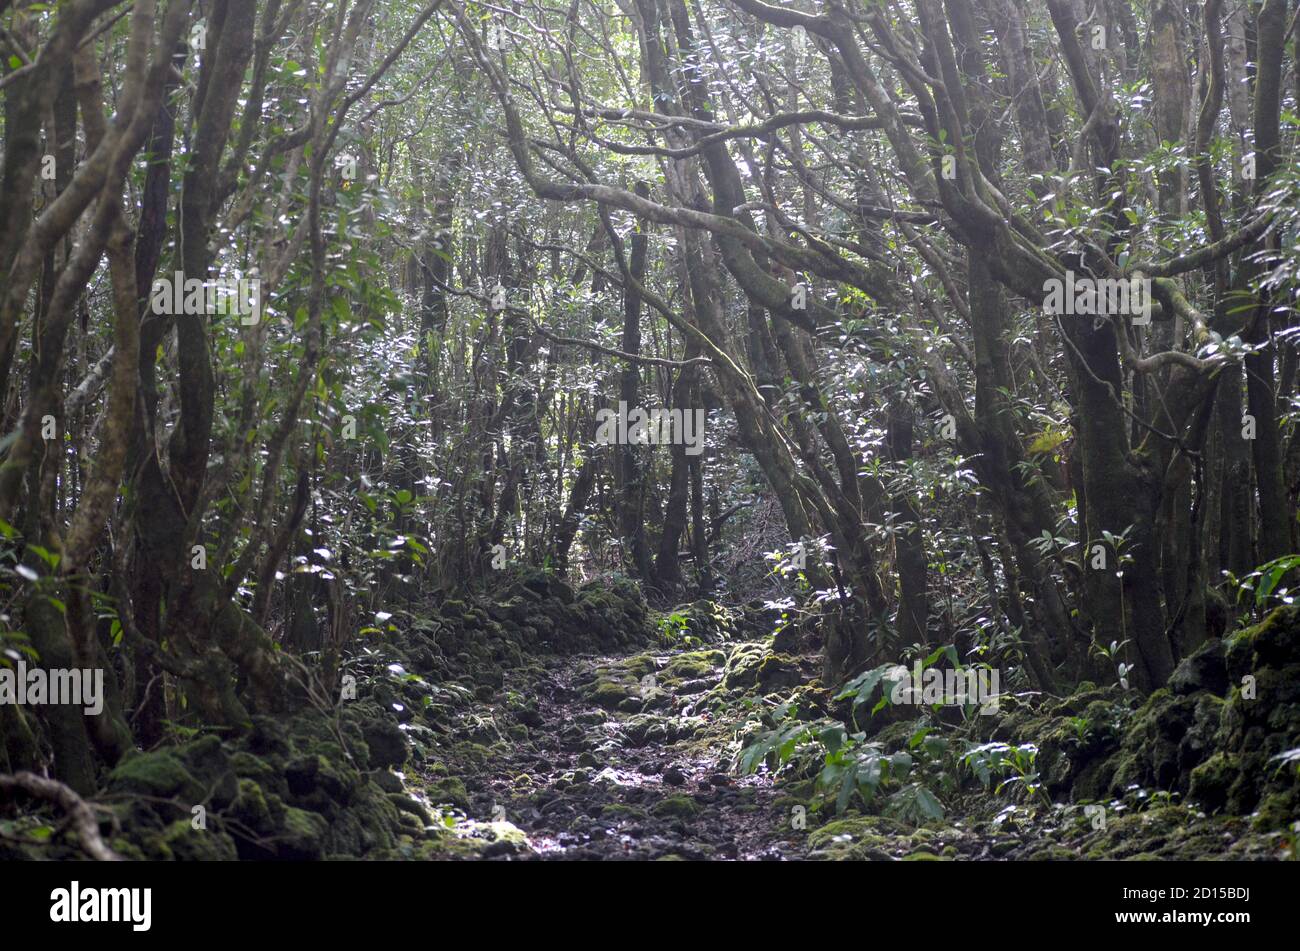 Secondary forest growing in the laurisilva biome of Pico island, (Azores, Portugal), currently dominated by the highly invasive Australian species Pit Stock Photo